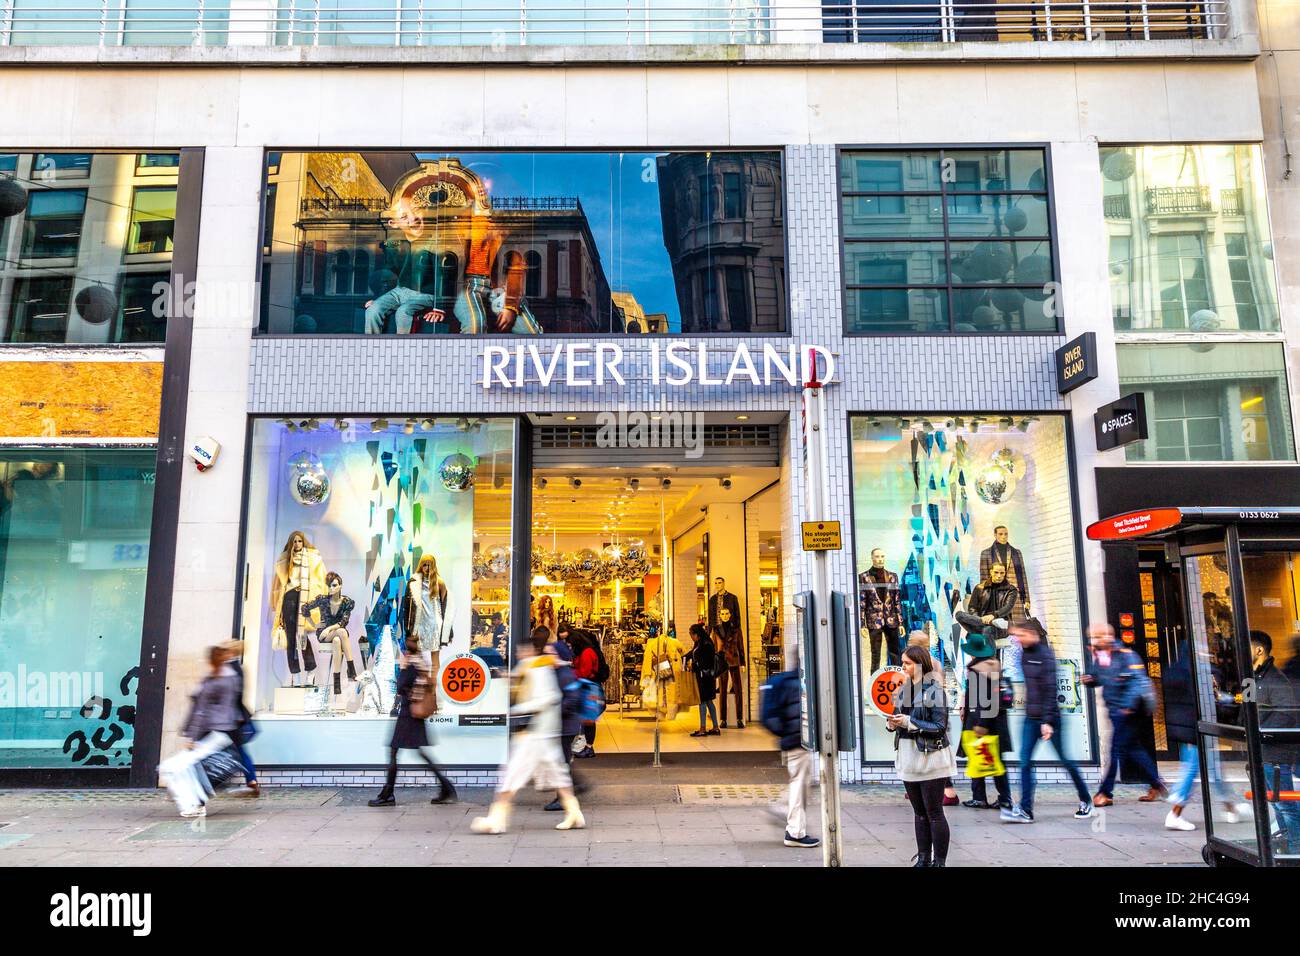 Facade of the River Island clothing store on Oxford Street, London, UK Stock Photo